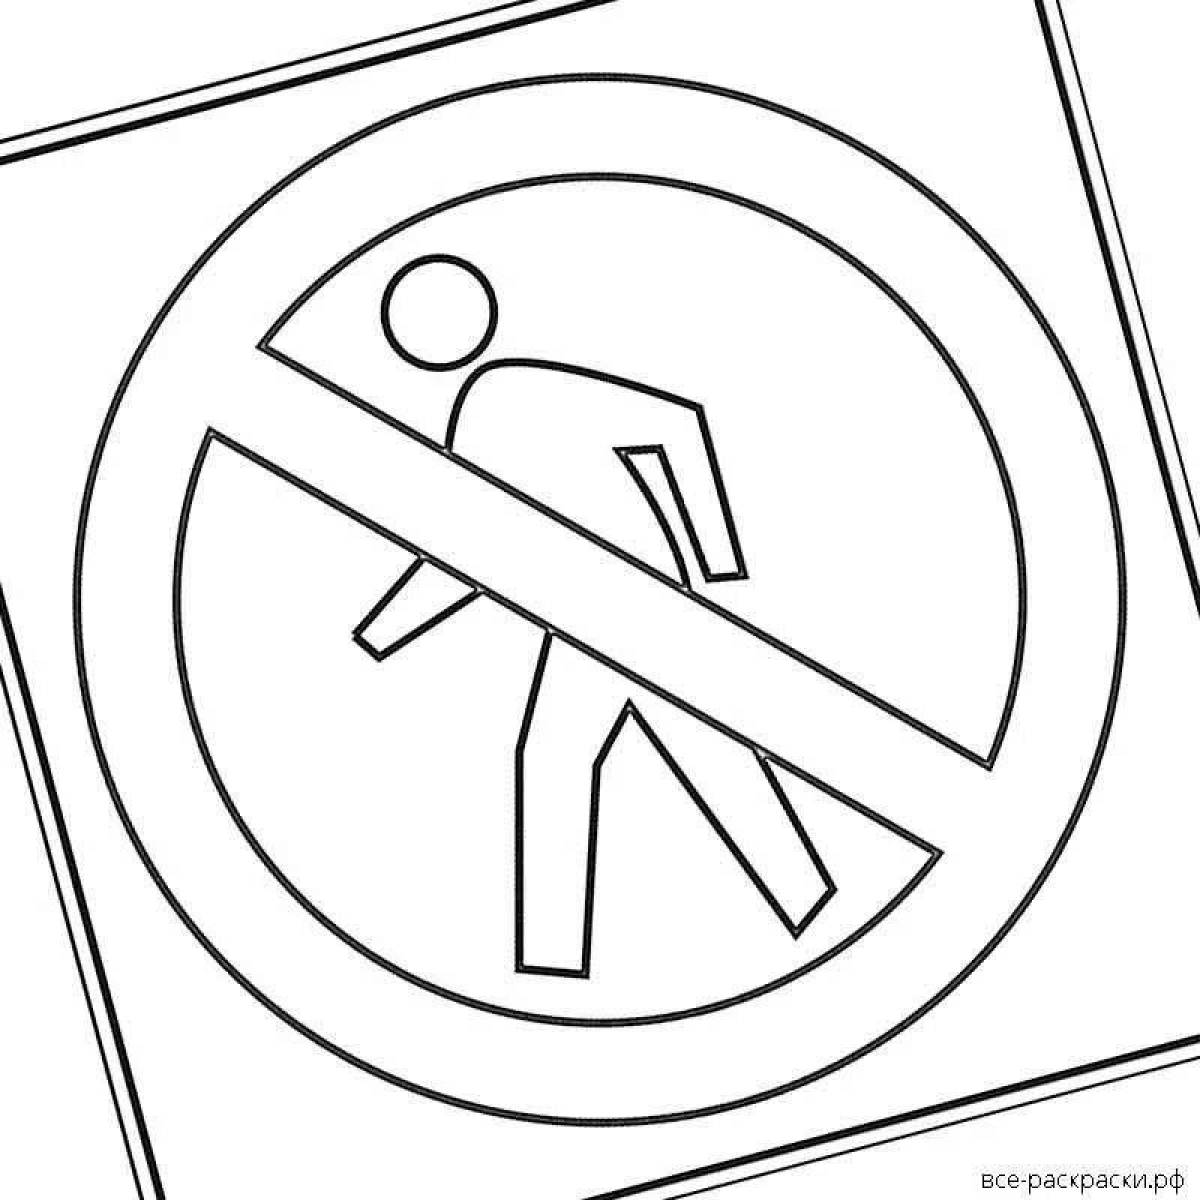 Bright No Pedestrian Traffic Sign Coloring Page